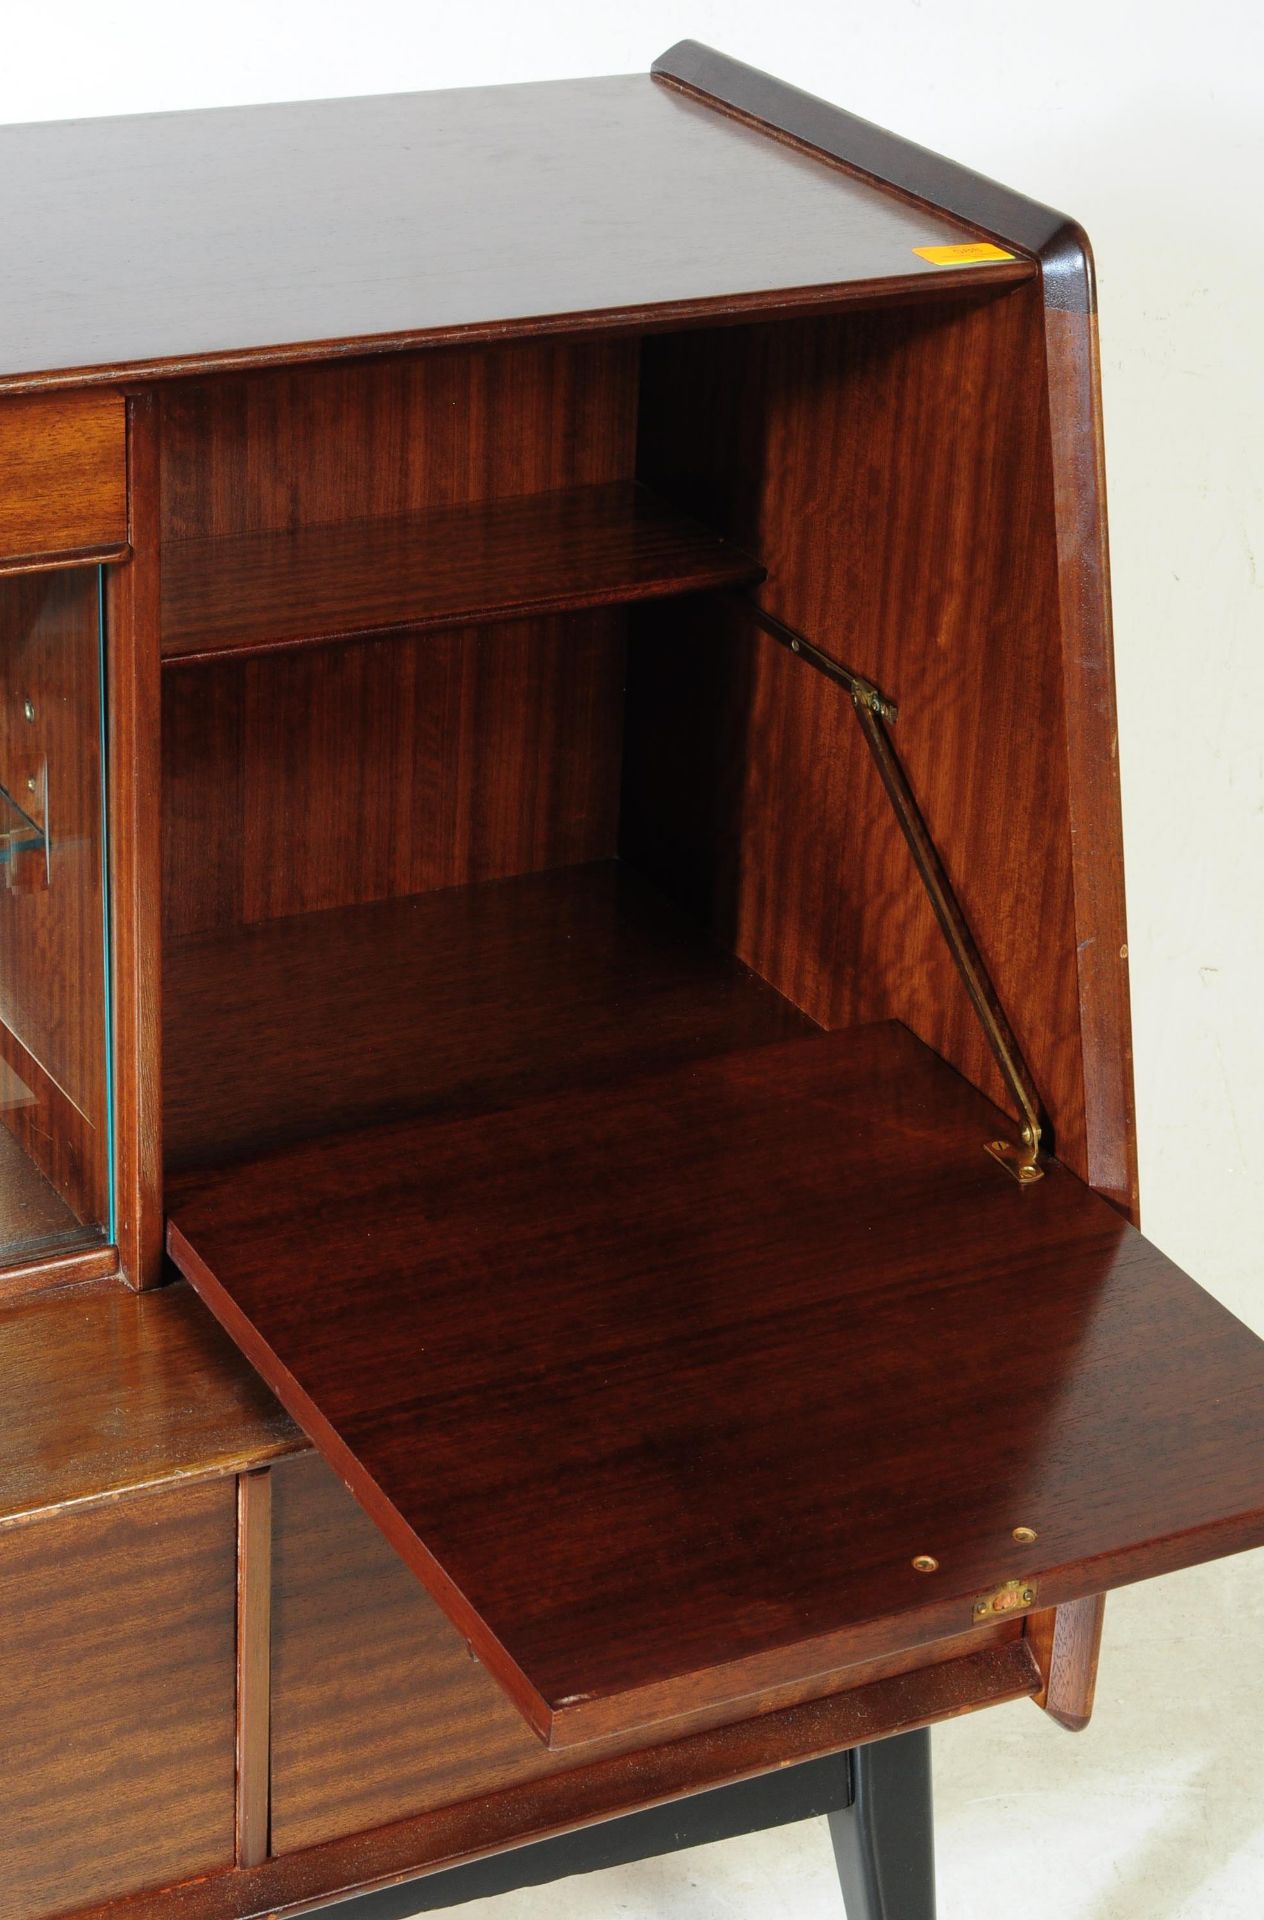 G-PLAN - MID 20TH CENTURY TEAK SIDEBOARD COCKTAIL CABINET - Image 3 of 7